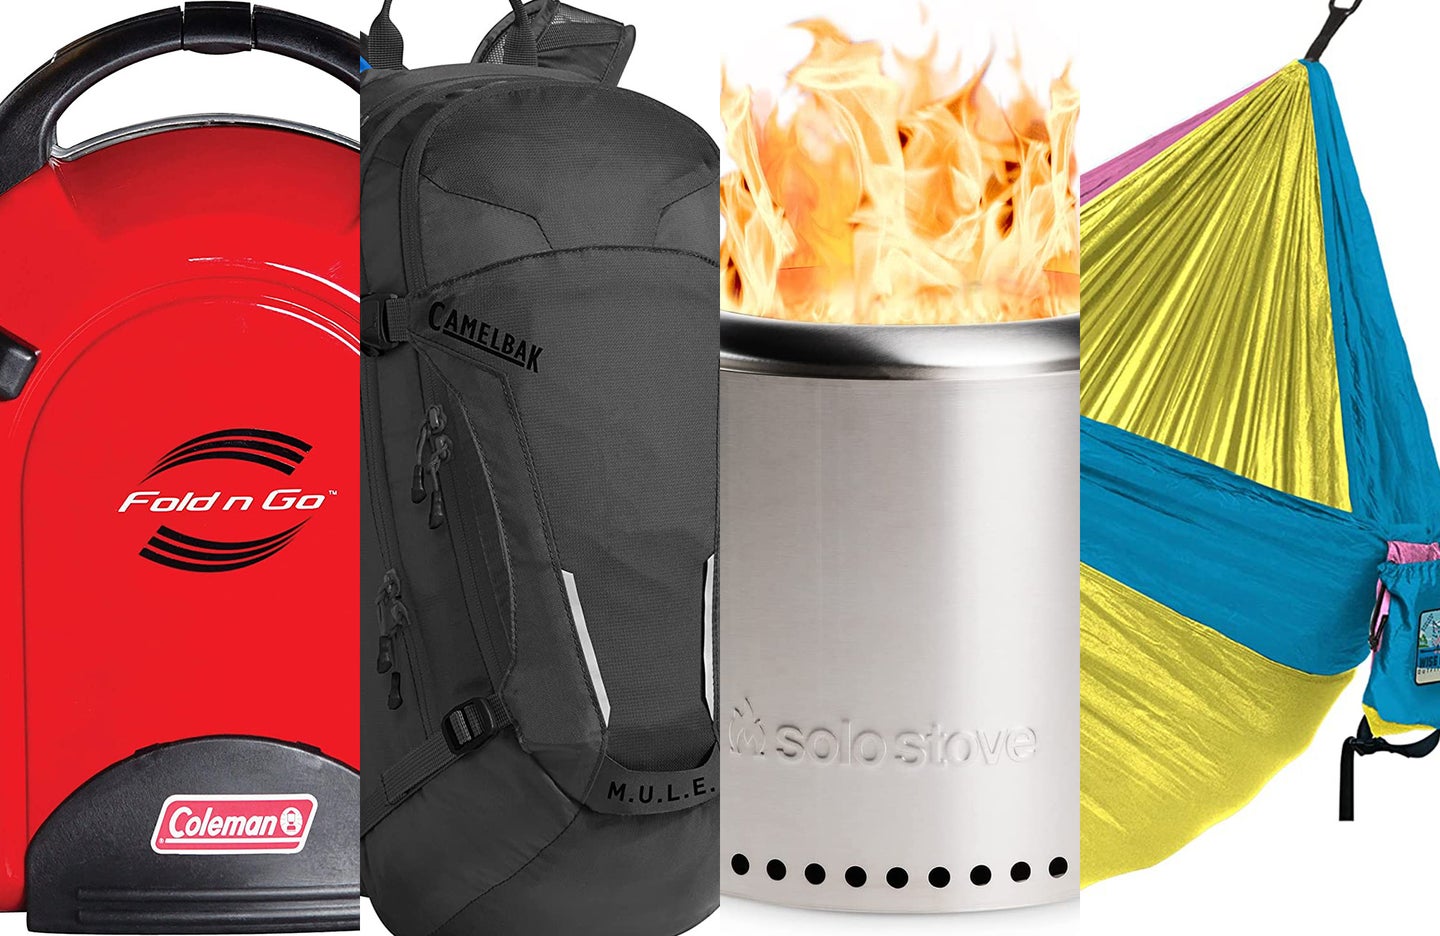 A lineup of camping gear on sale as part of Amazon Prime Early Access